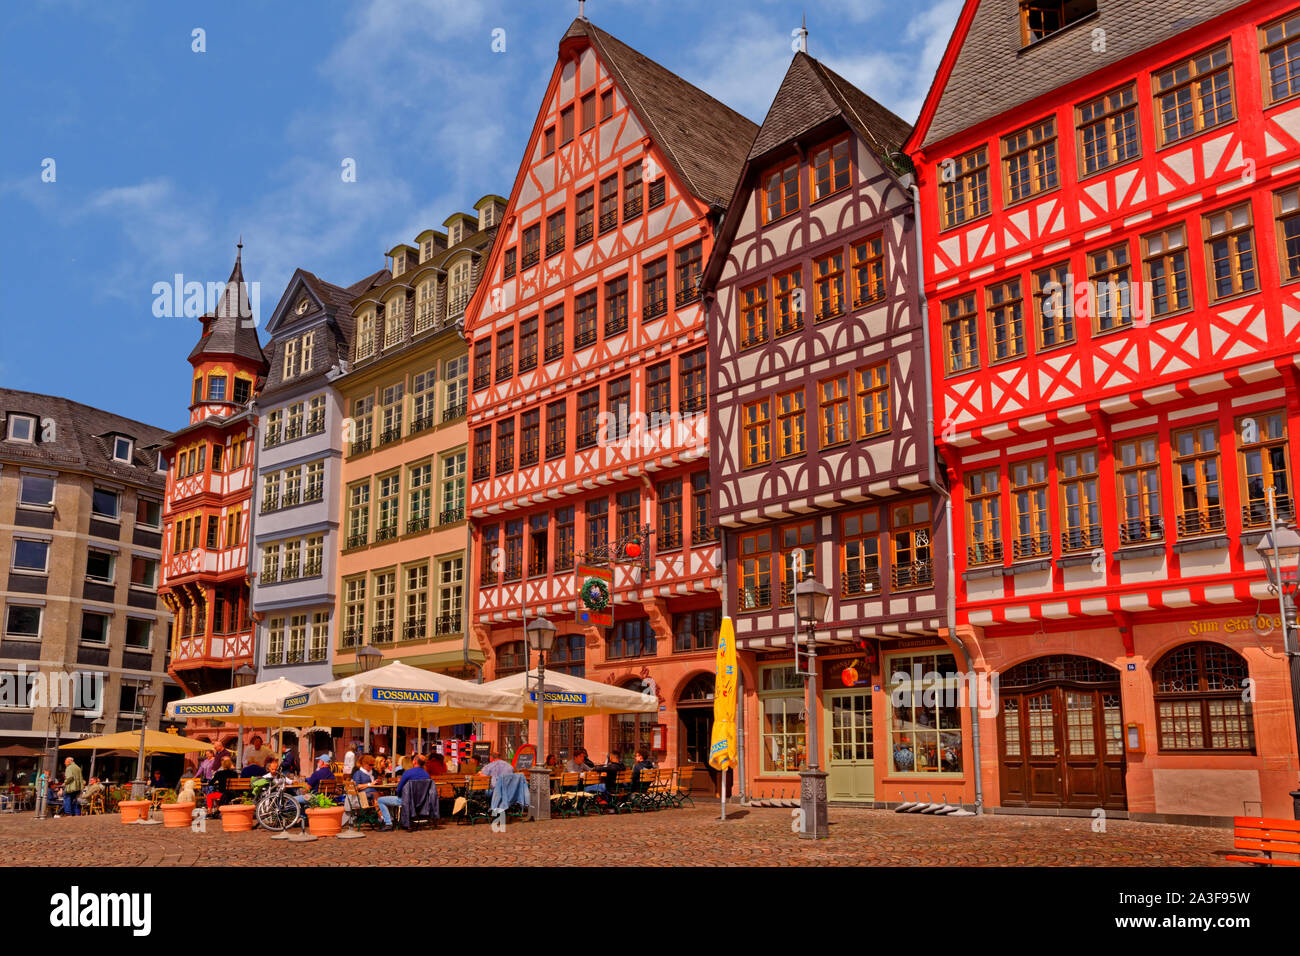 Half timbered buildings on Römerberg in the old town of Frankfurt am Main, Hesse, Germany. Stock Photo